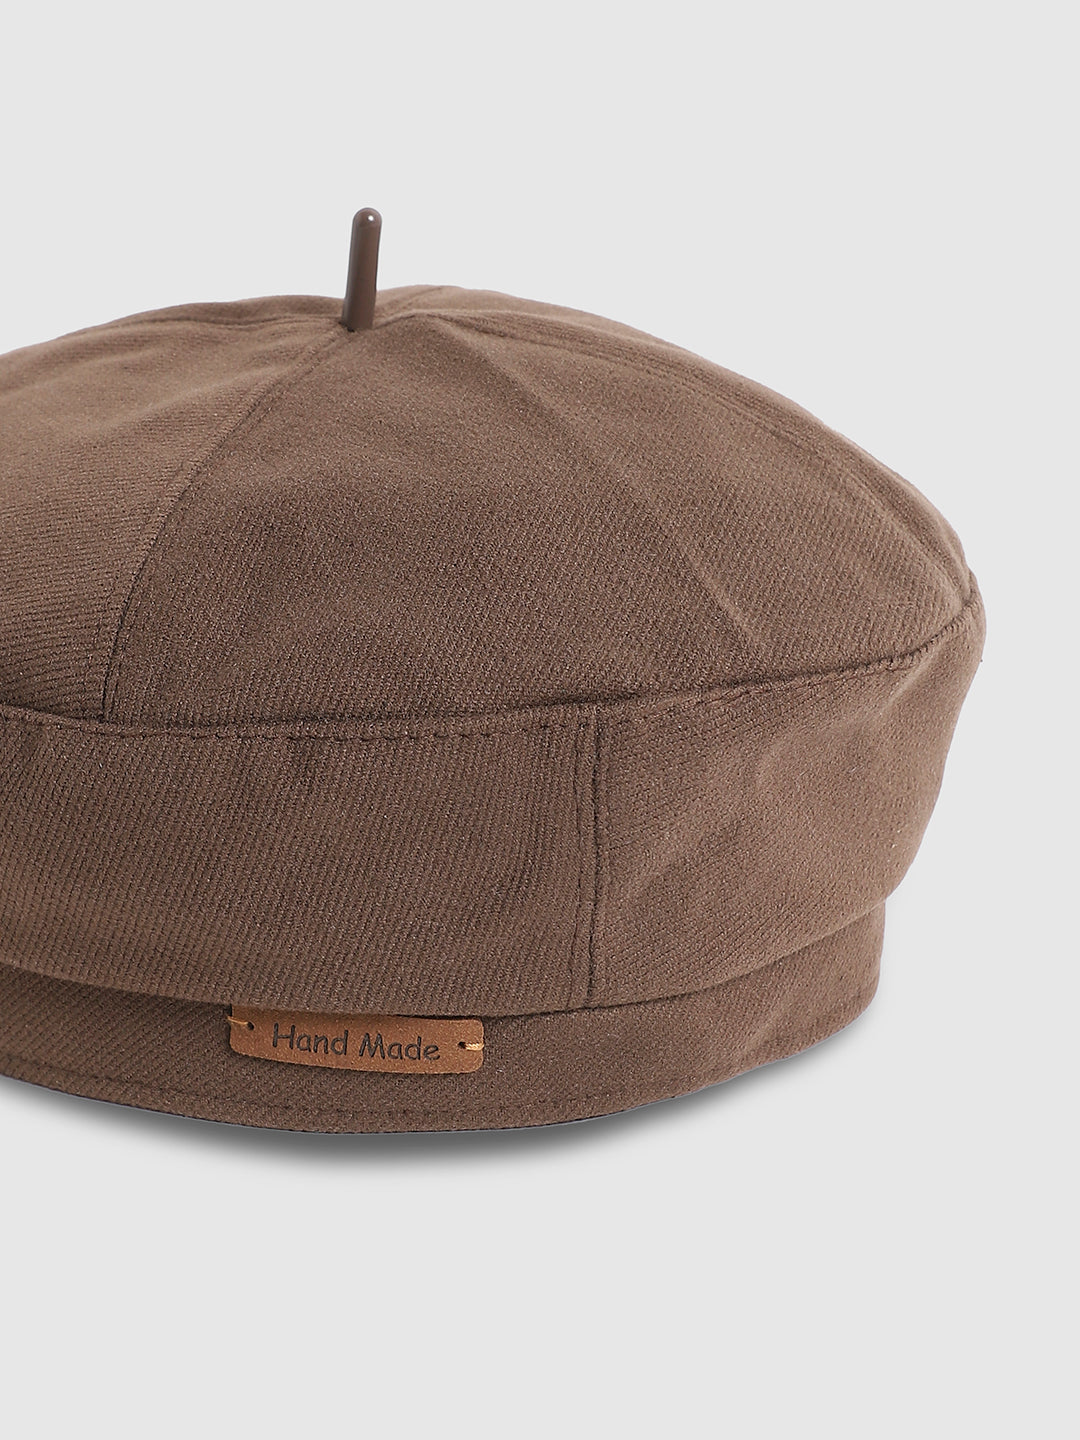 Pin Tipped Beret Hat - Coffee Brown